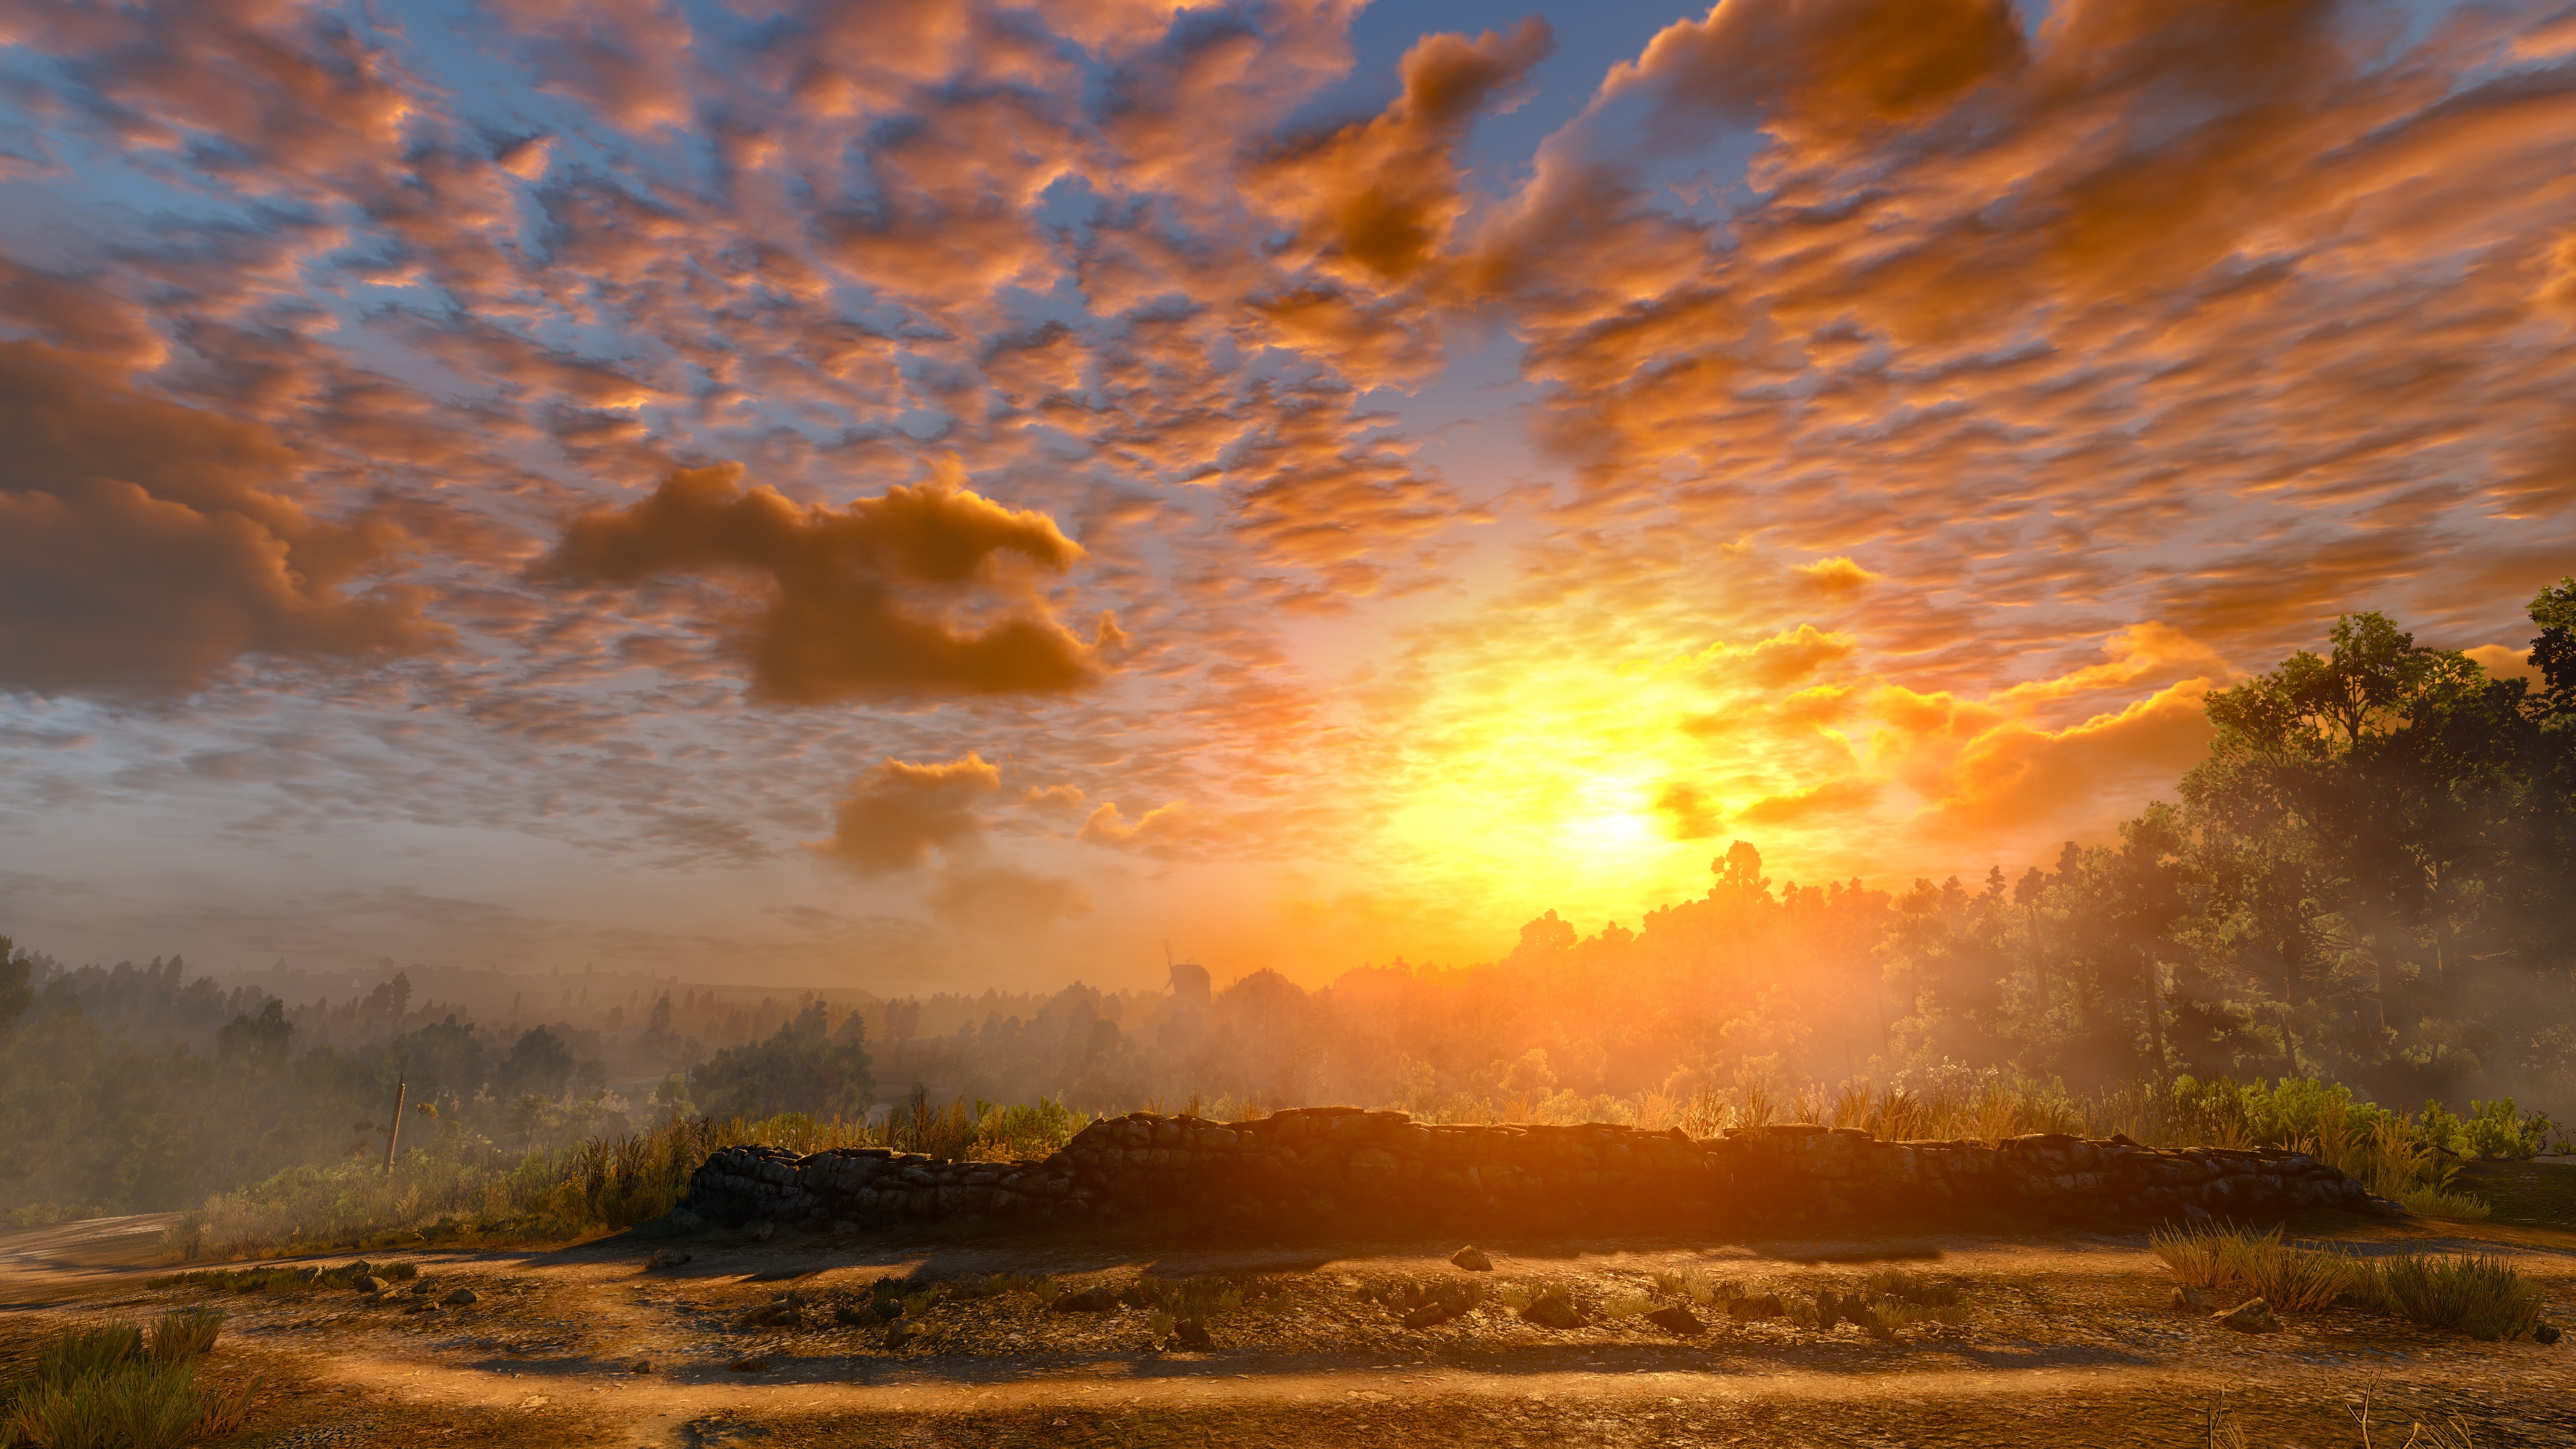 General 3840x2160 The Witcher 3: Wild Hunt screen shot PC gaming clouds video game art sunset sunset glow video games sunlight trees Sun sky orange sky forest CGI